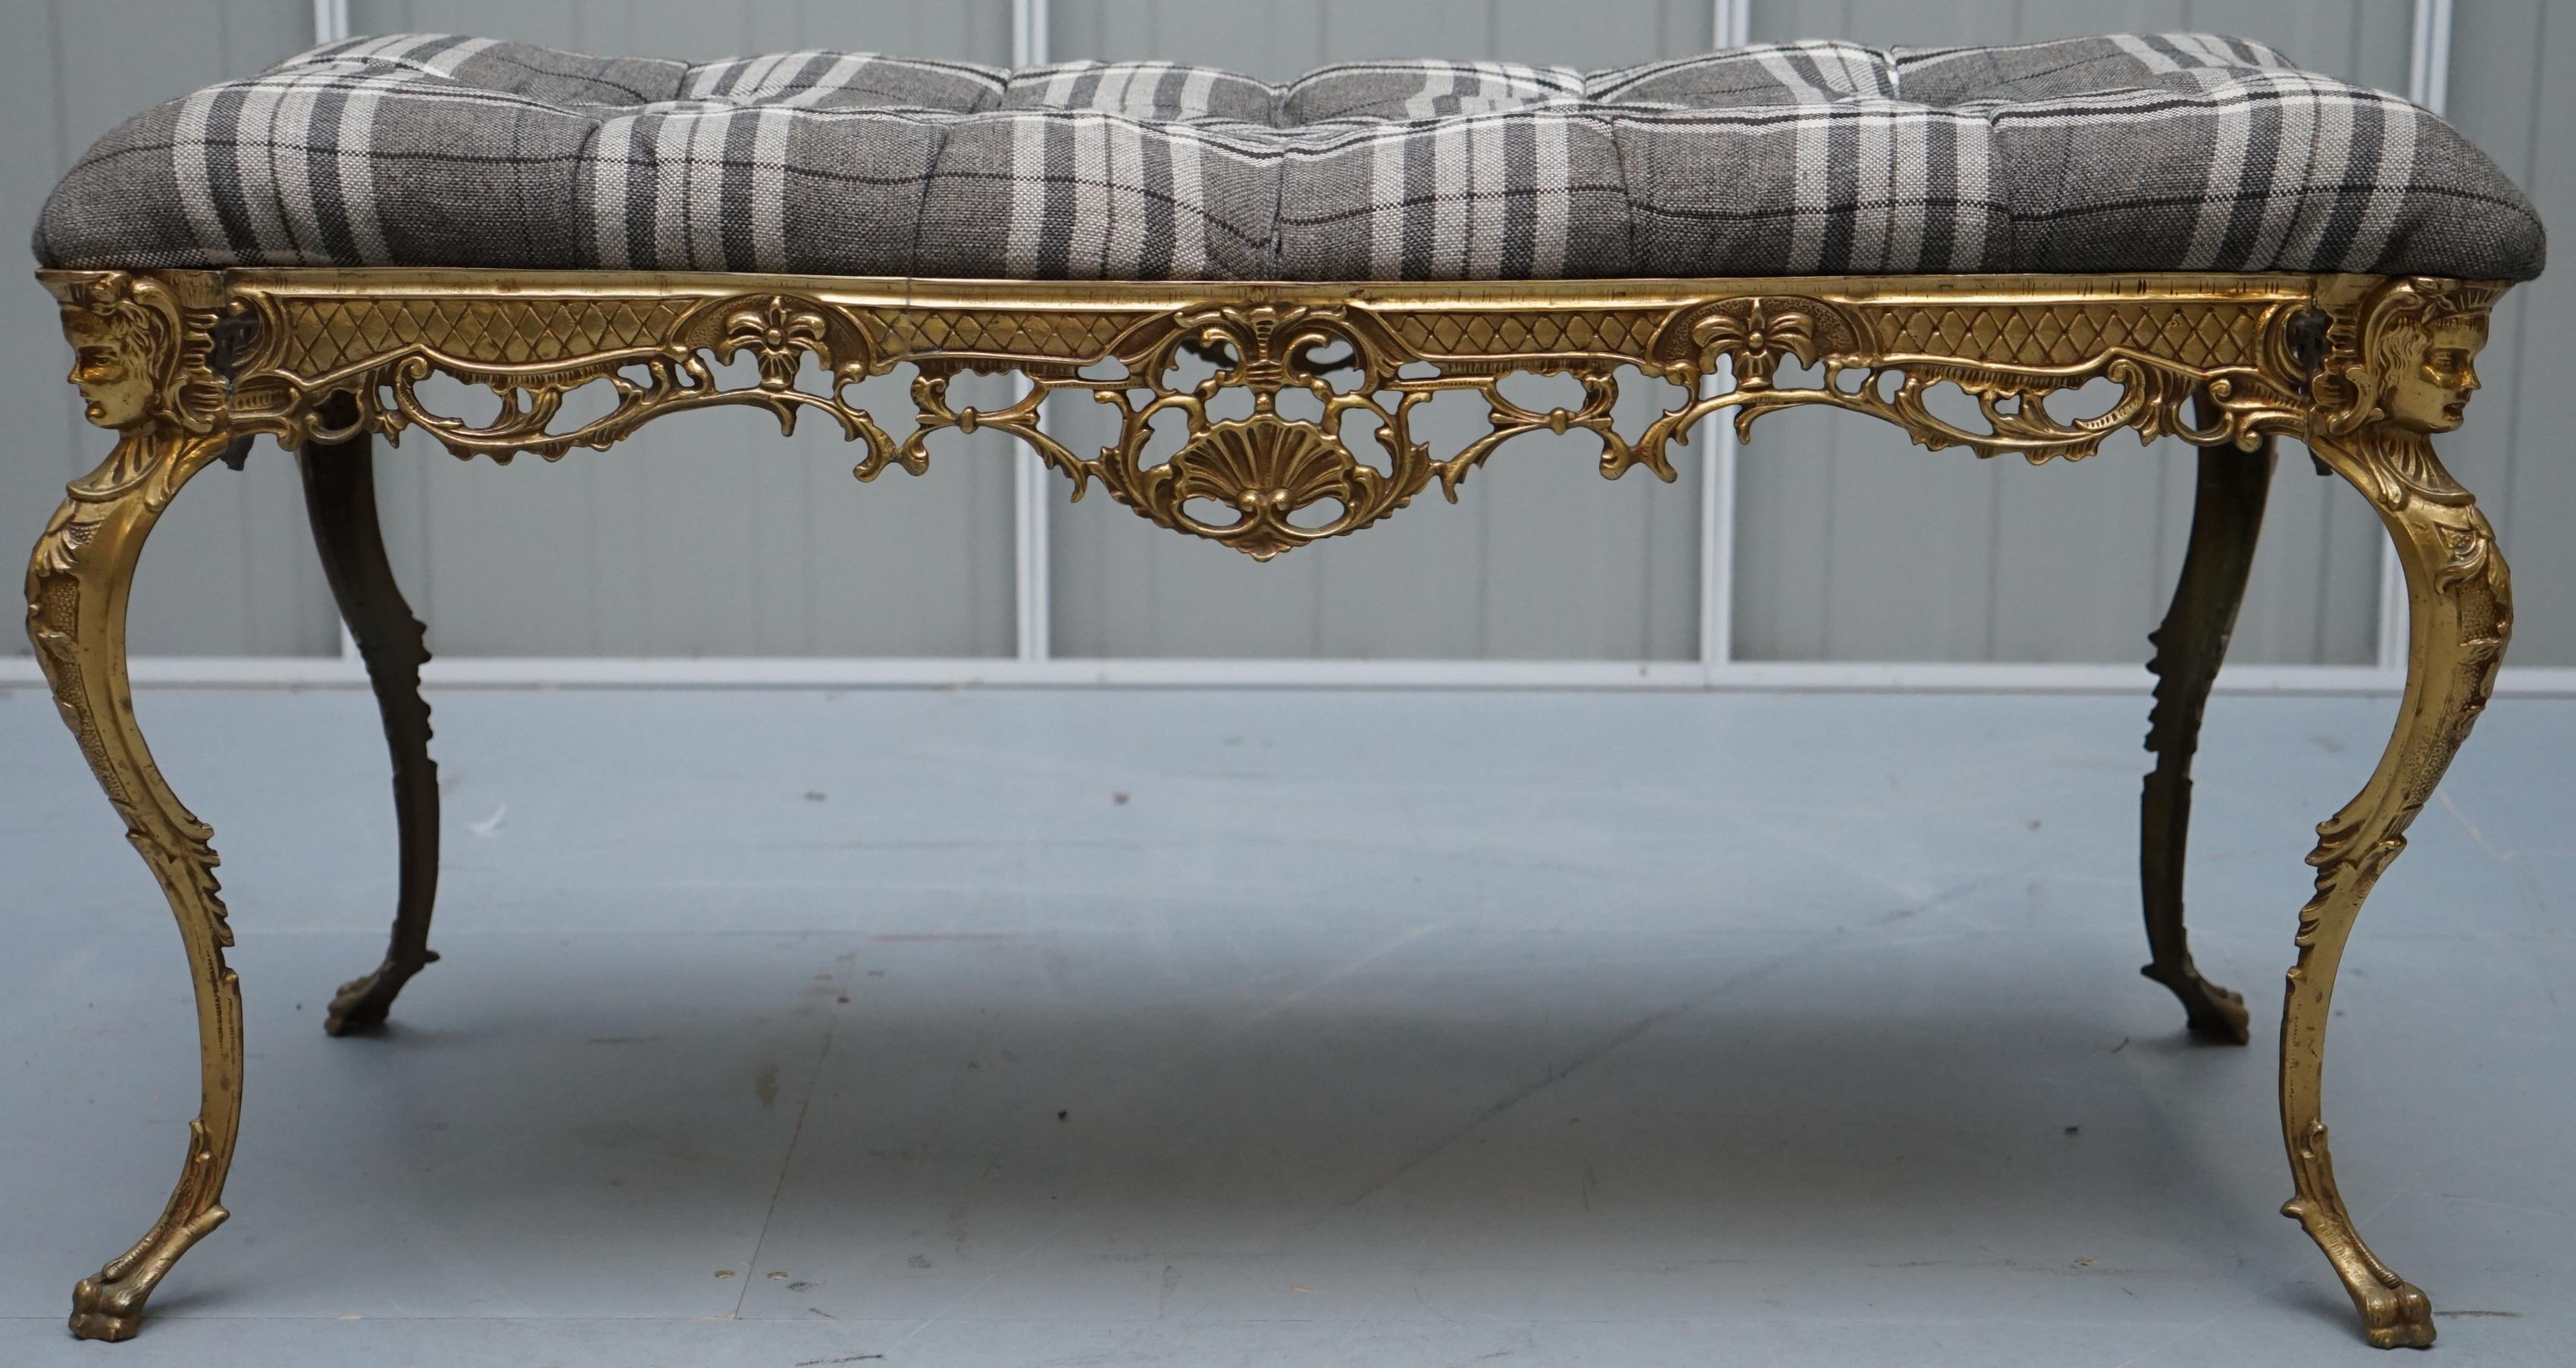 Neoclassical Revival Ornate French circa 1920s Gold Gilt Brass Bench New Chesterfield Upholstery